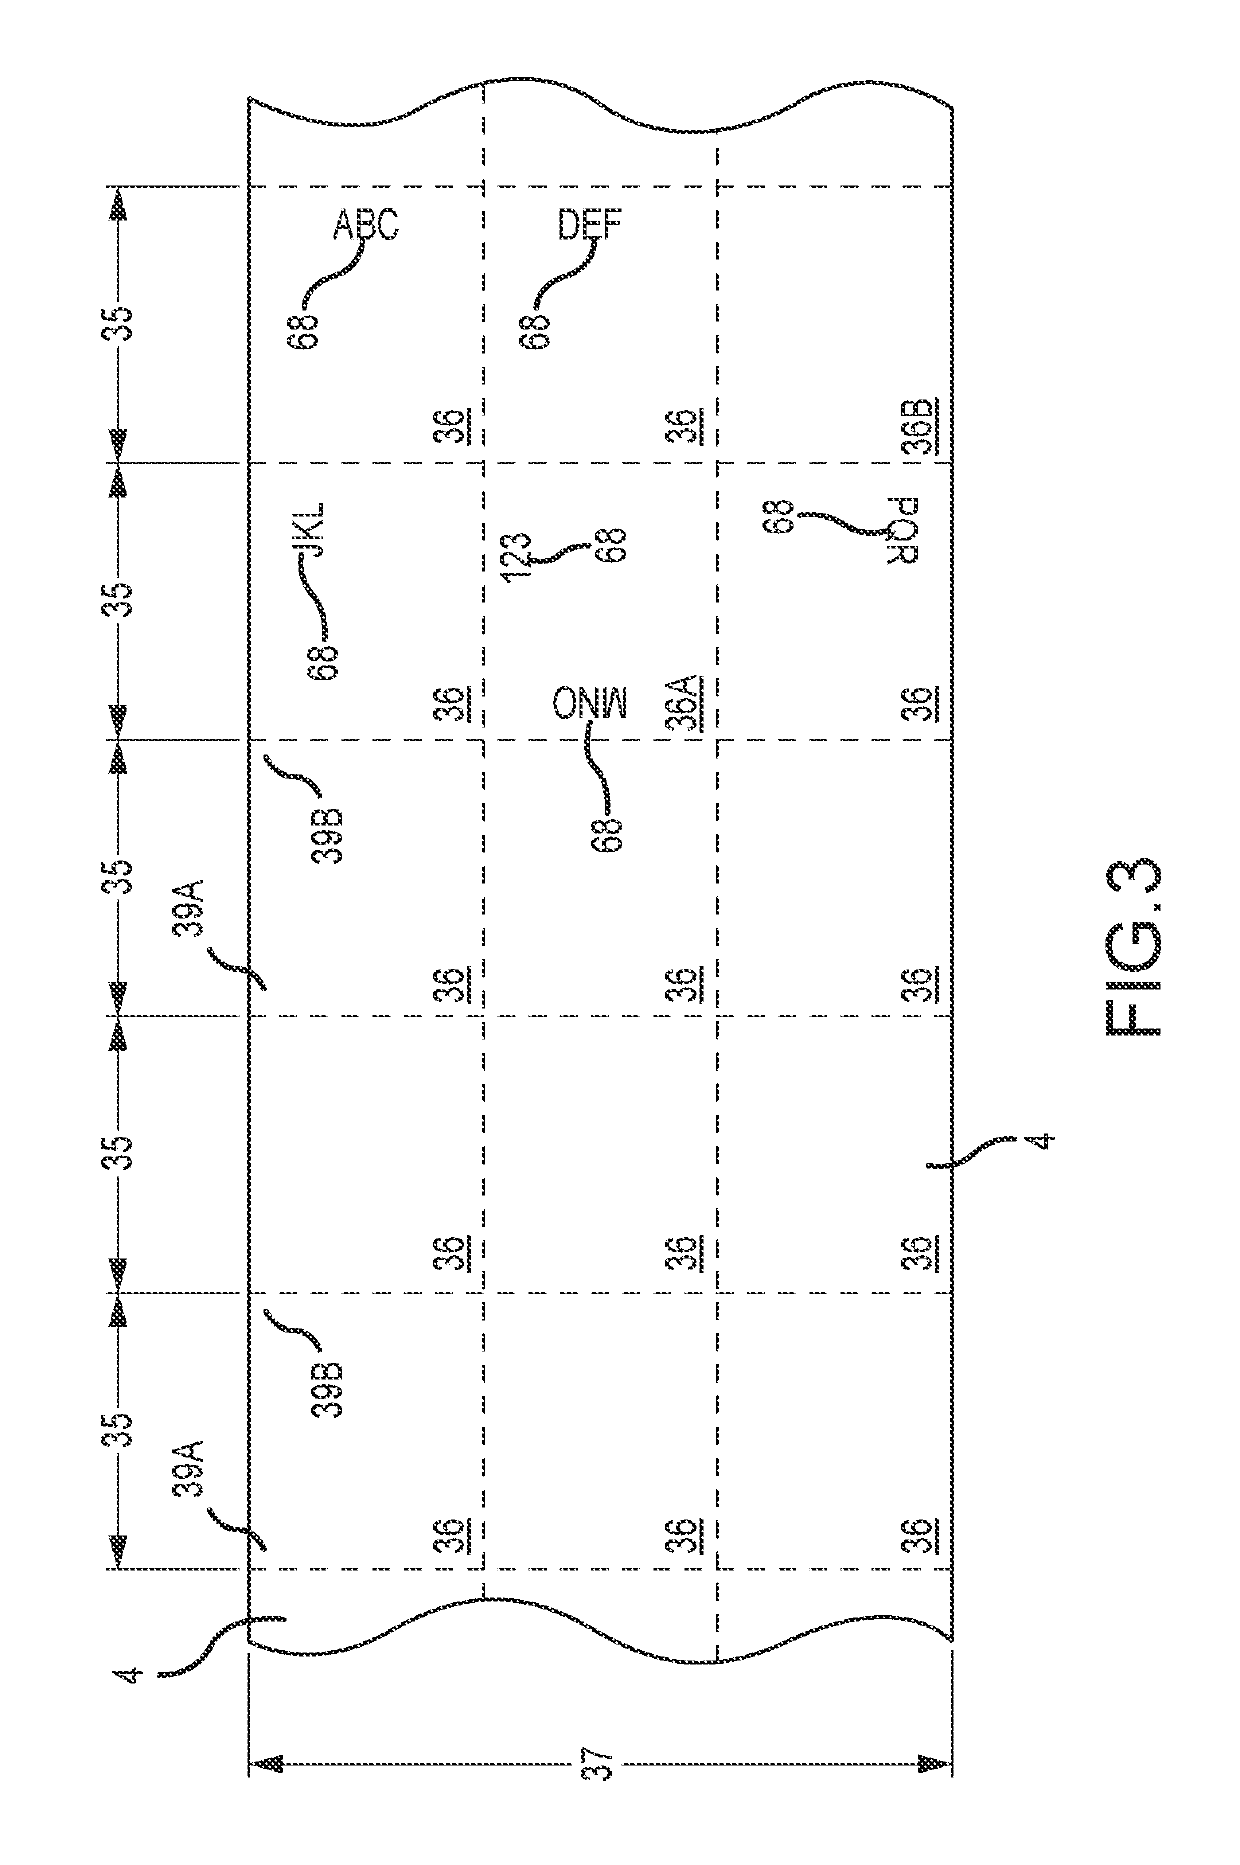 Method and apparatus for controlling an operation performed on a continuous sheet of material